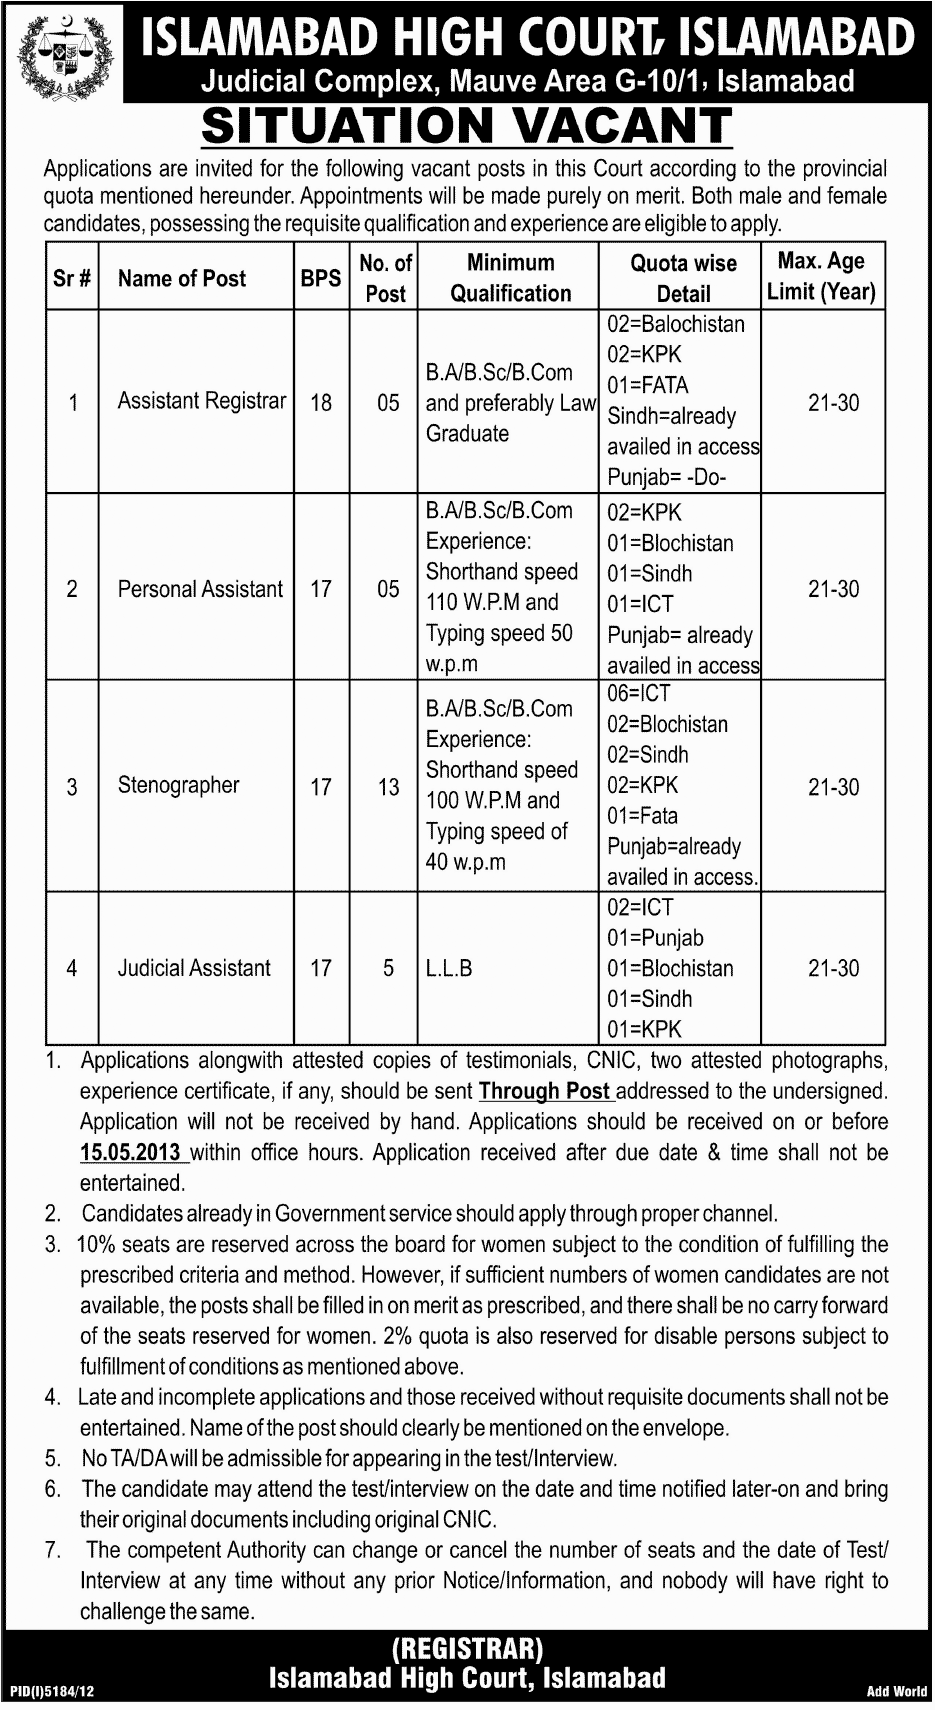 Situation Vacant in Islamabad High Court Pakistan 2013